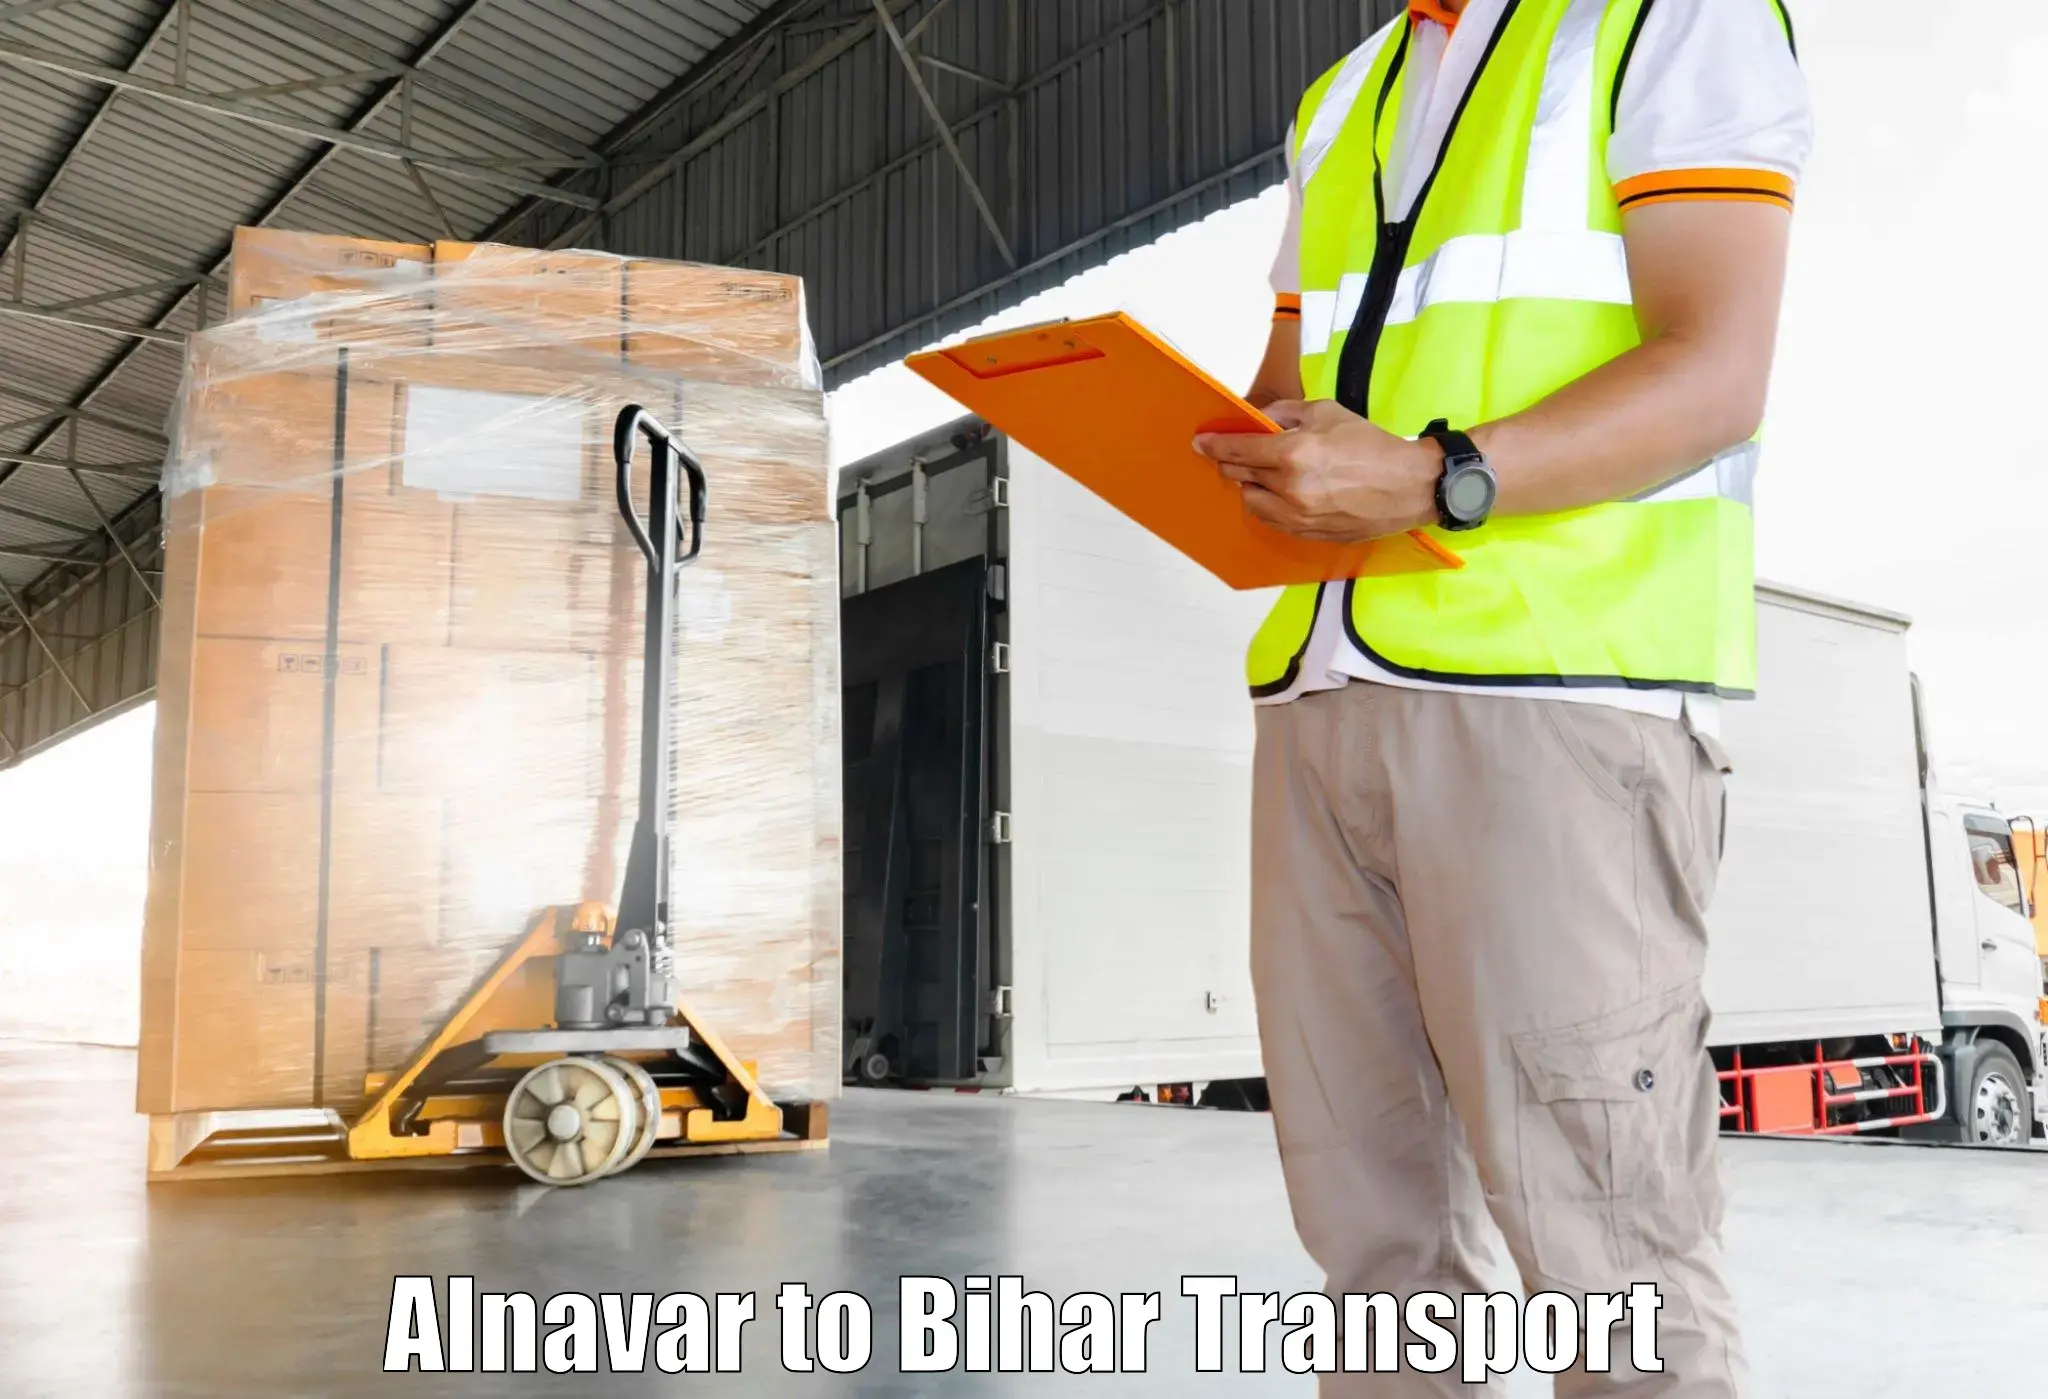 Container transportation services in Alnavar to Mahaddipur